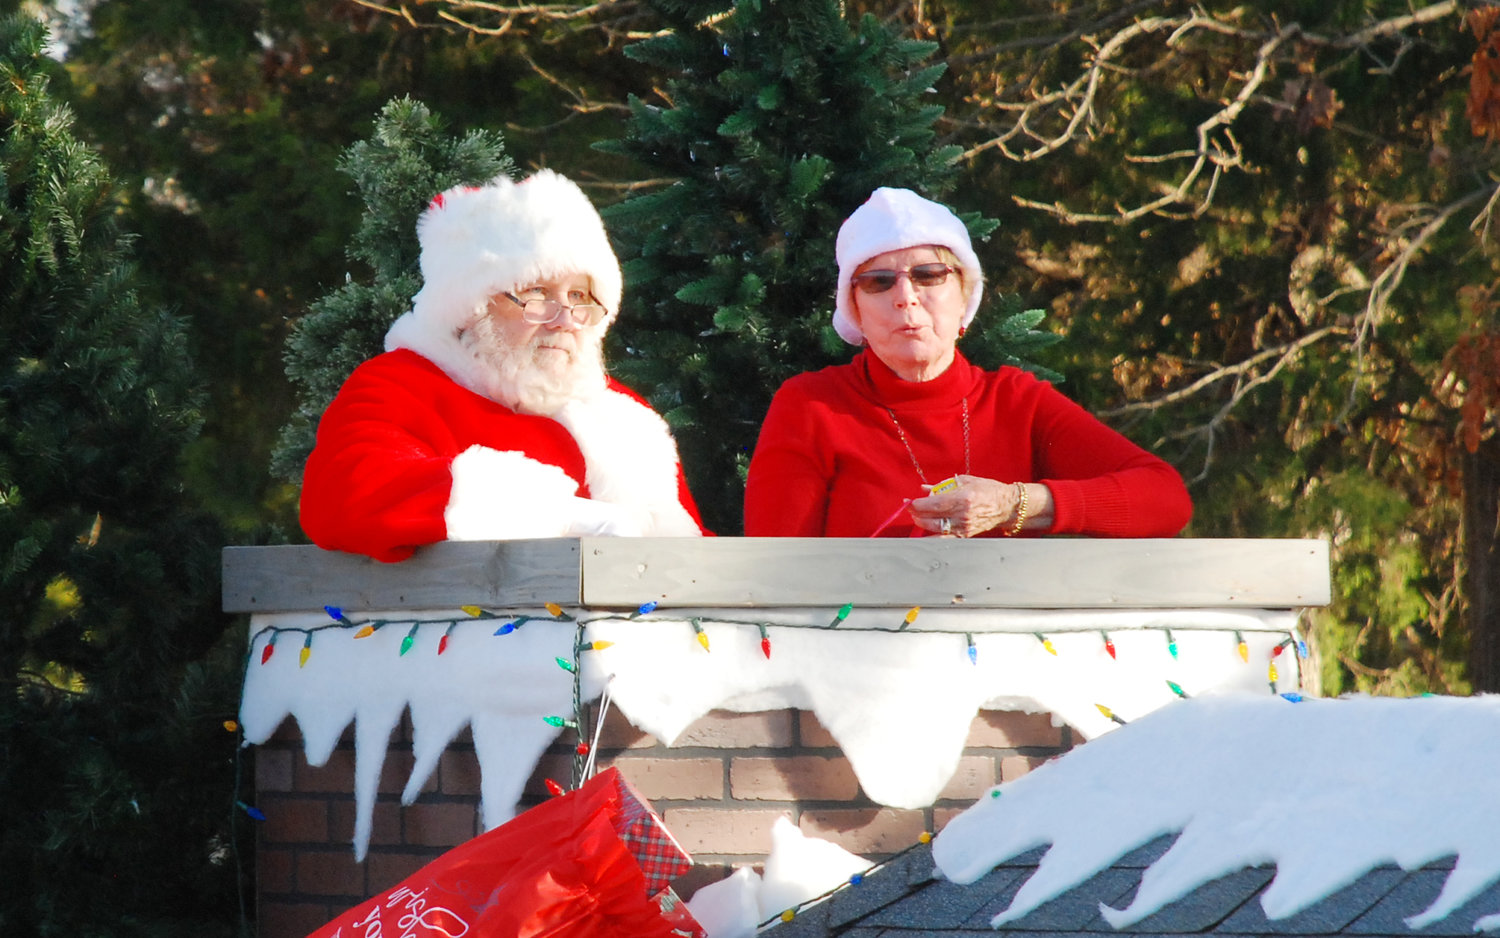 SANTA CLAUS AND MRS. CLAUS ride in a float near the end of the 2021 Nixa Christmas Parade. The Clauses visited with Nixa children and families before returning to the North Pole in preparation for Dec. 25.